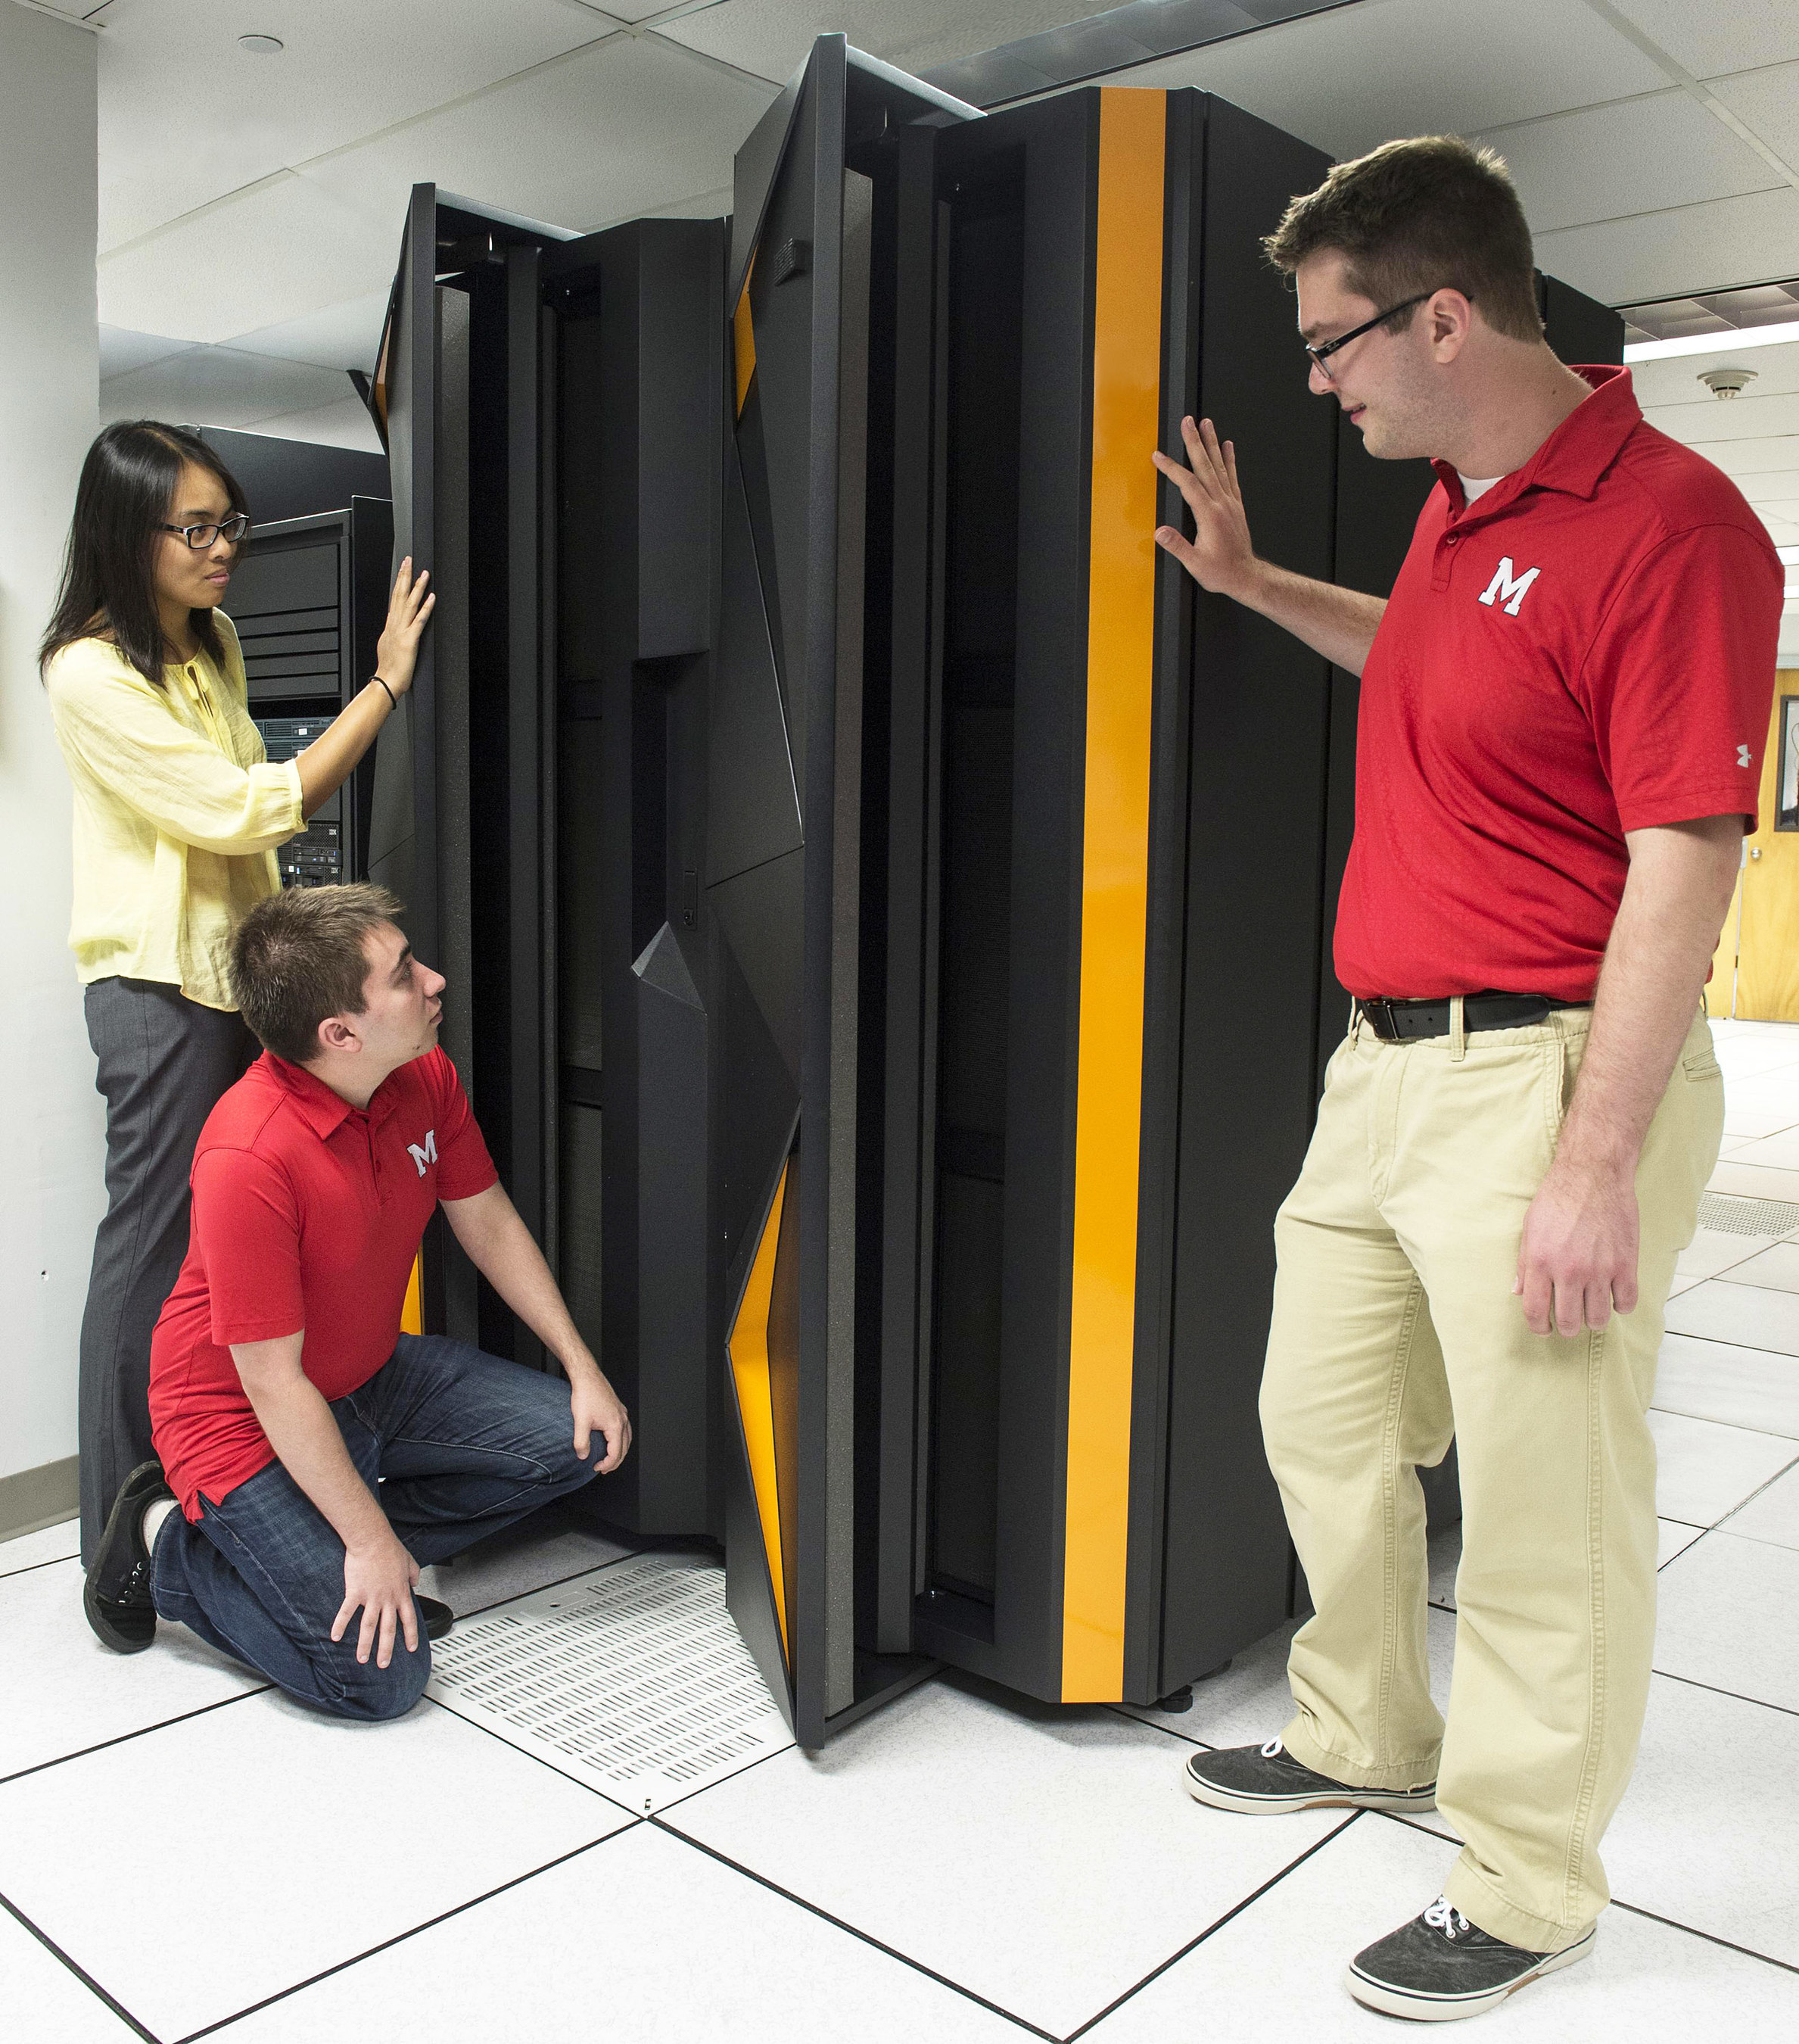 Marist College School of Computer Science & Mathematics students (from left) Paula Batoon, Dominic Rosillo and Charles Hall inspect the school's IBM LinuxONE system. Marist is one of three universities around the world that will host the IBM LinuxONE Developer Cloud, which provides developers access to a virtual IBM LinuxONE at no cost to create and test applications. IBM also is working with academic and corporate partners to host a Master the Mainframe programming contest in 47 countries this year to reach next-generation developers. (Jon Simon/Feature Photo Service for IBM)